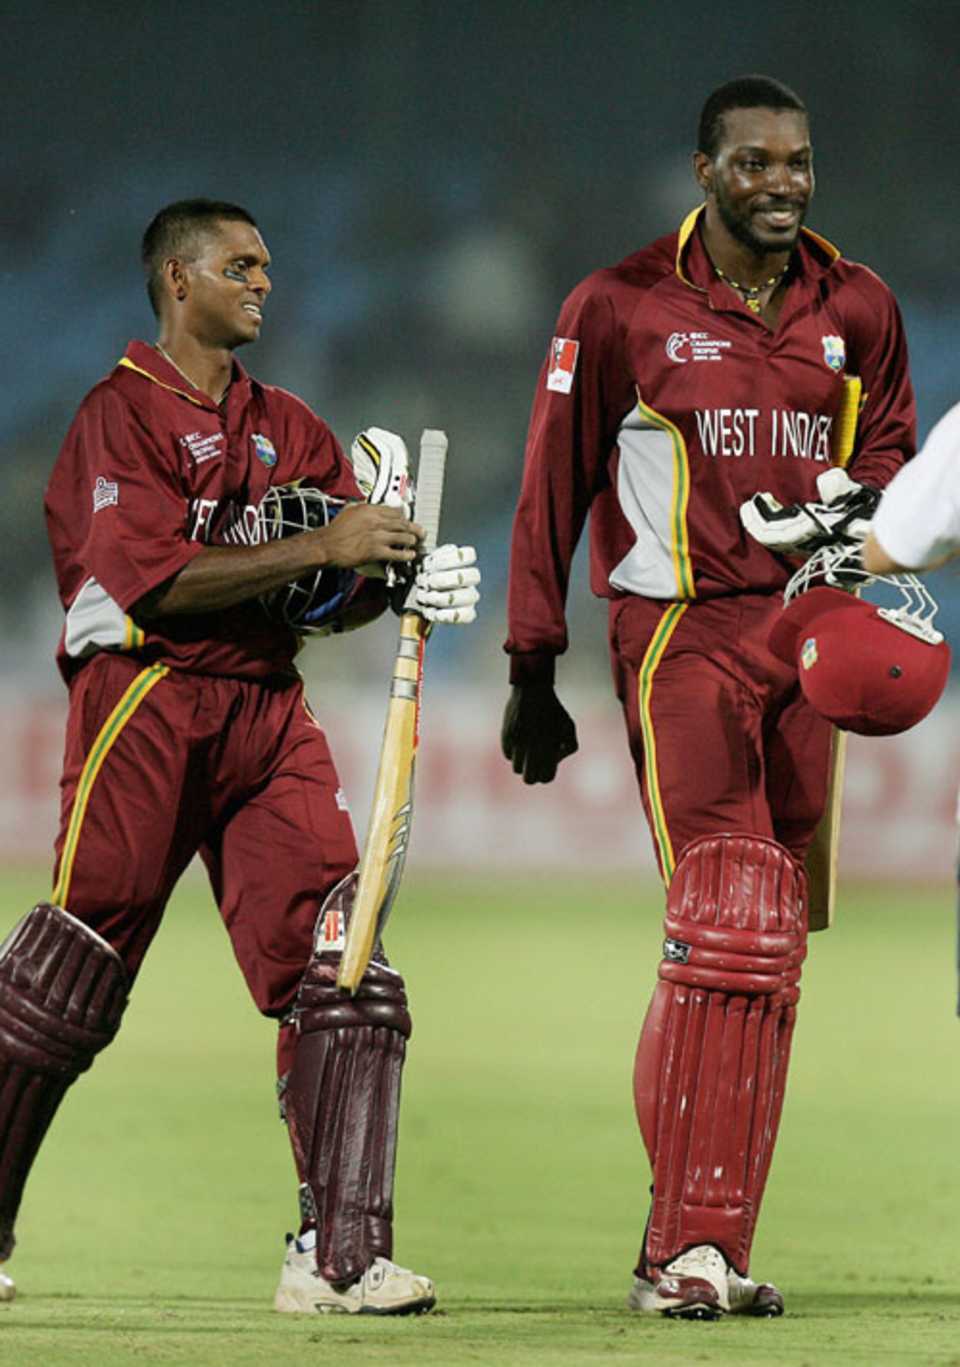 Shivnarine Chanderpaul and Chris Gayle completed a 10-wicket win for West Indies